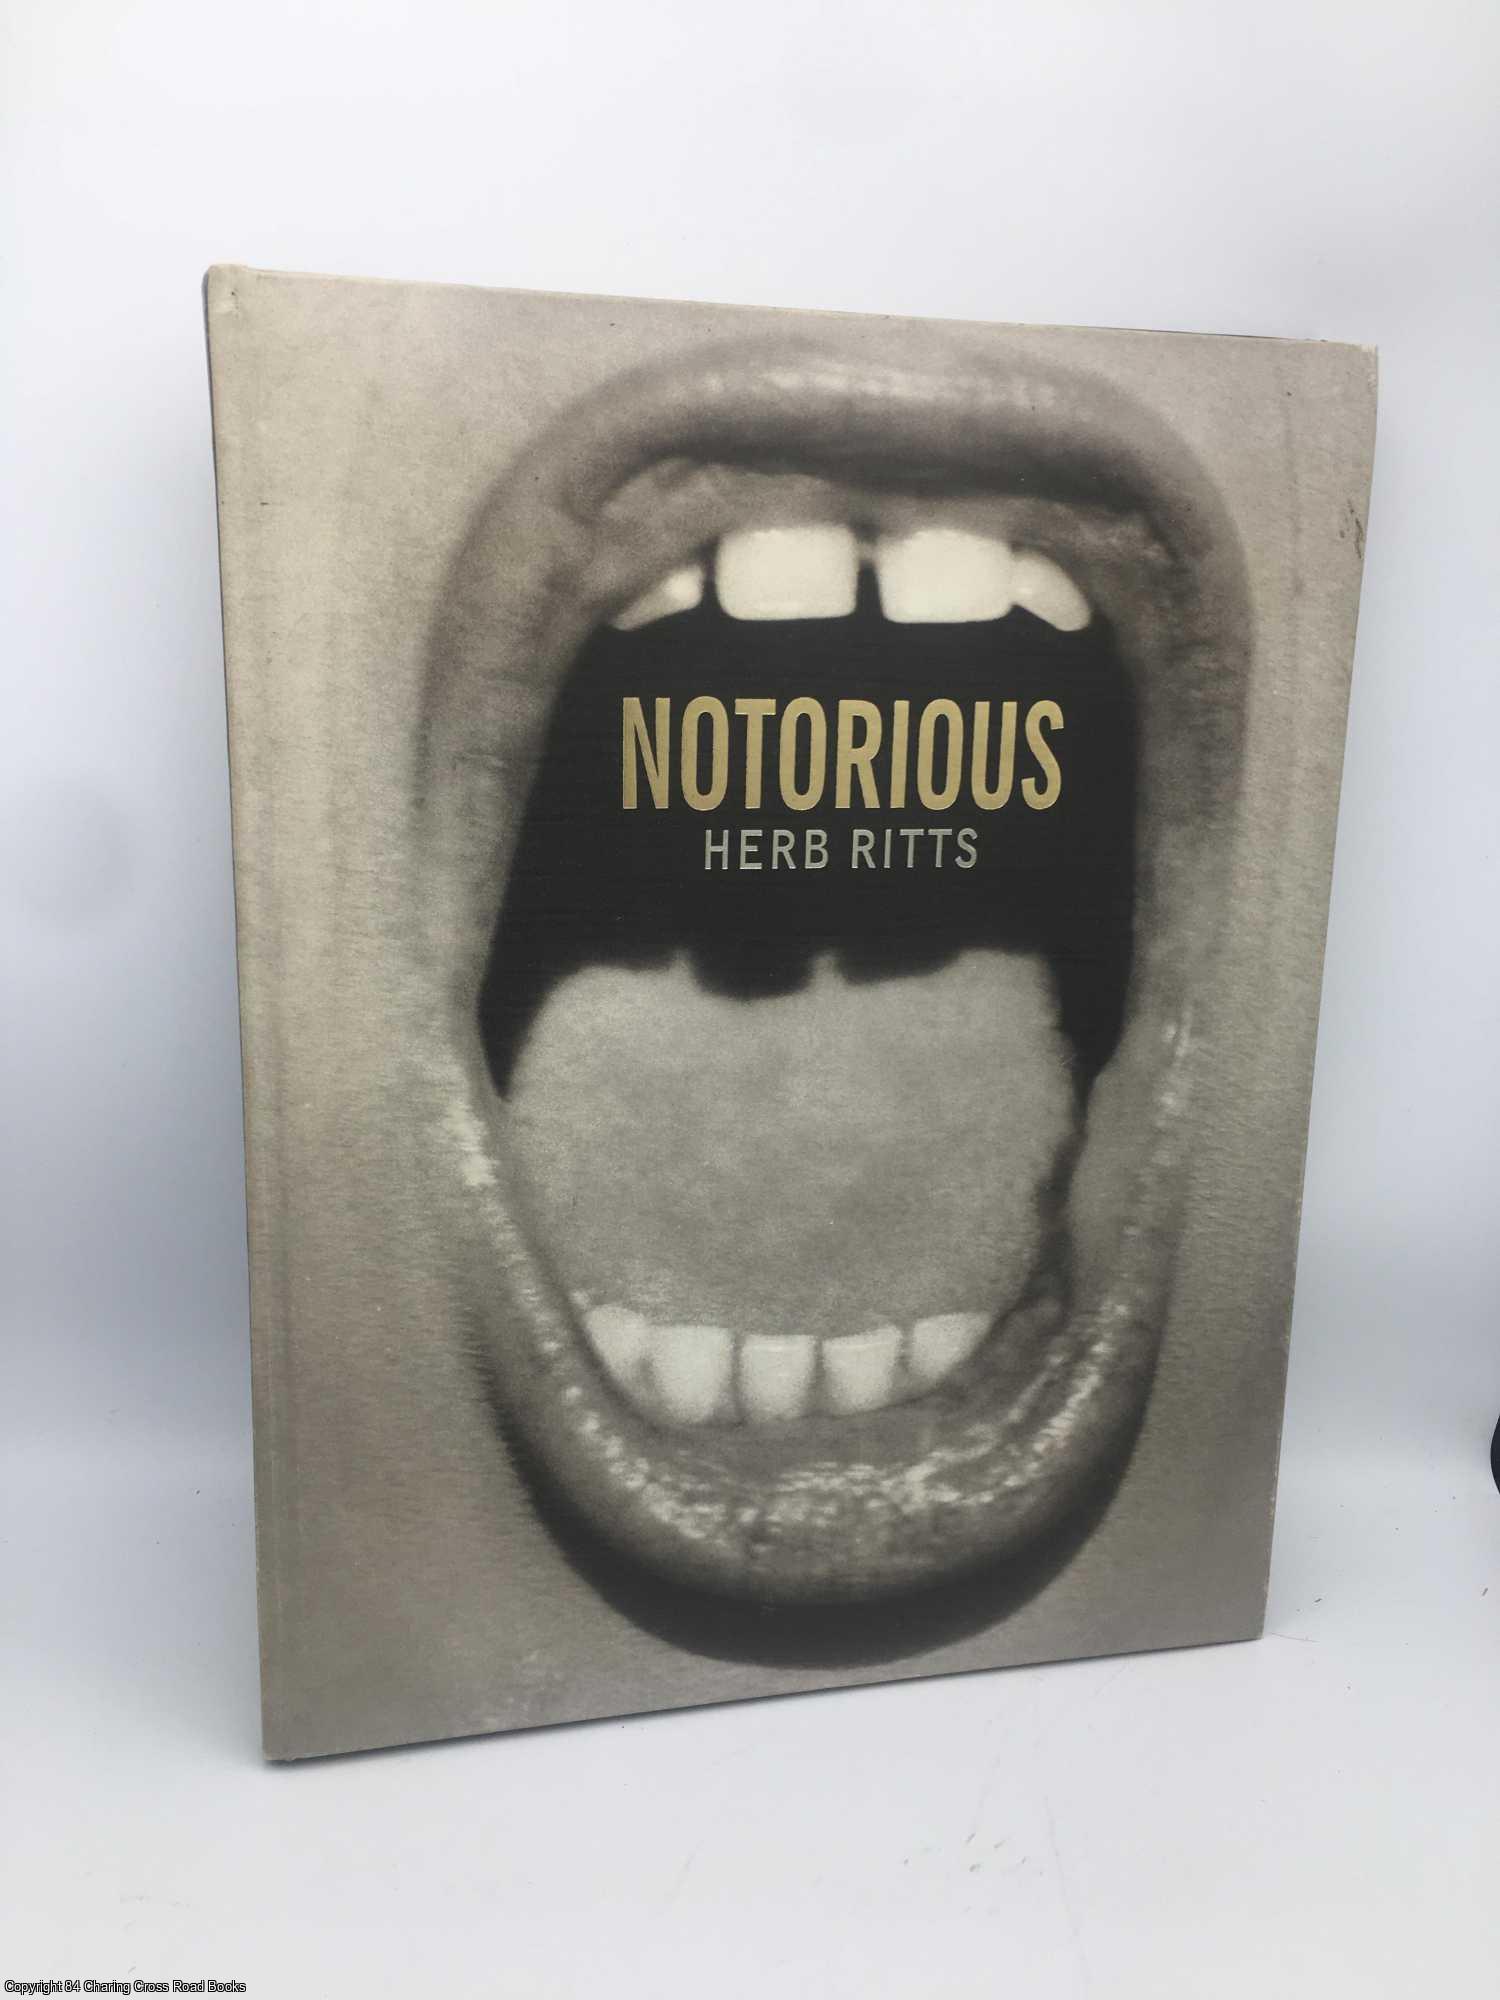 Ritts, Herb - Notorious